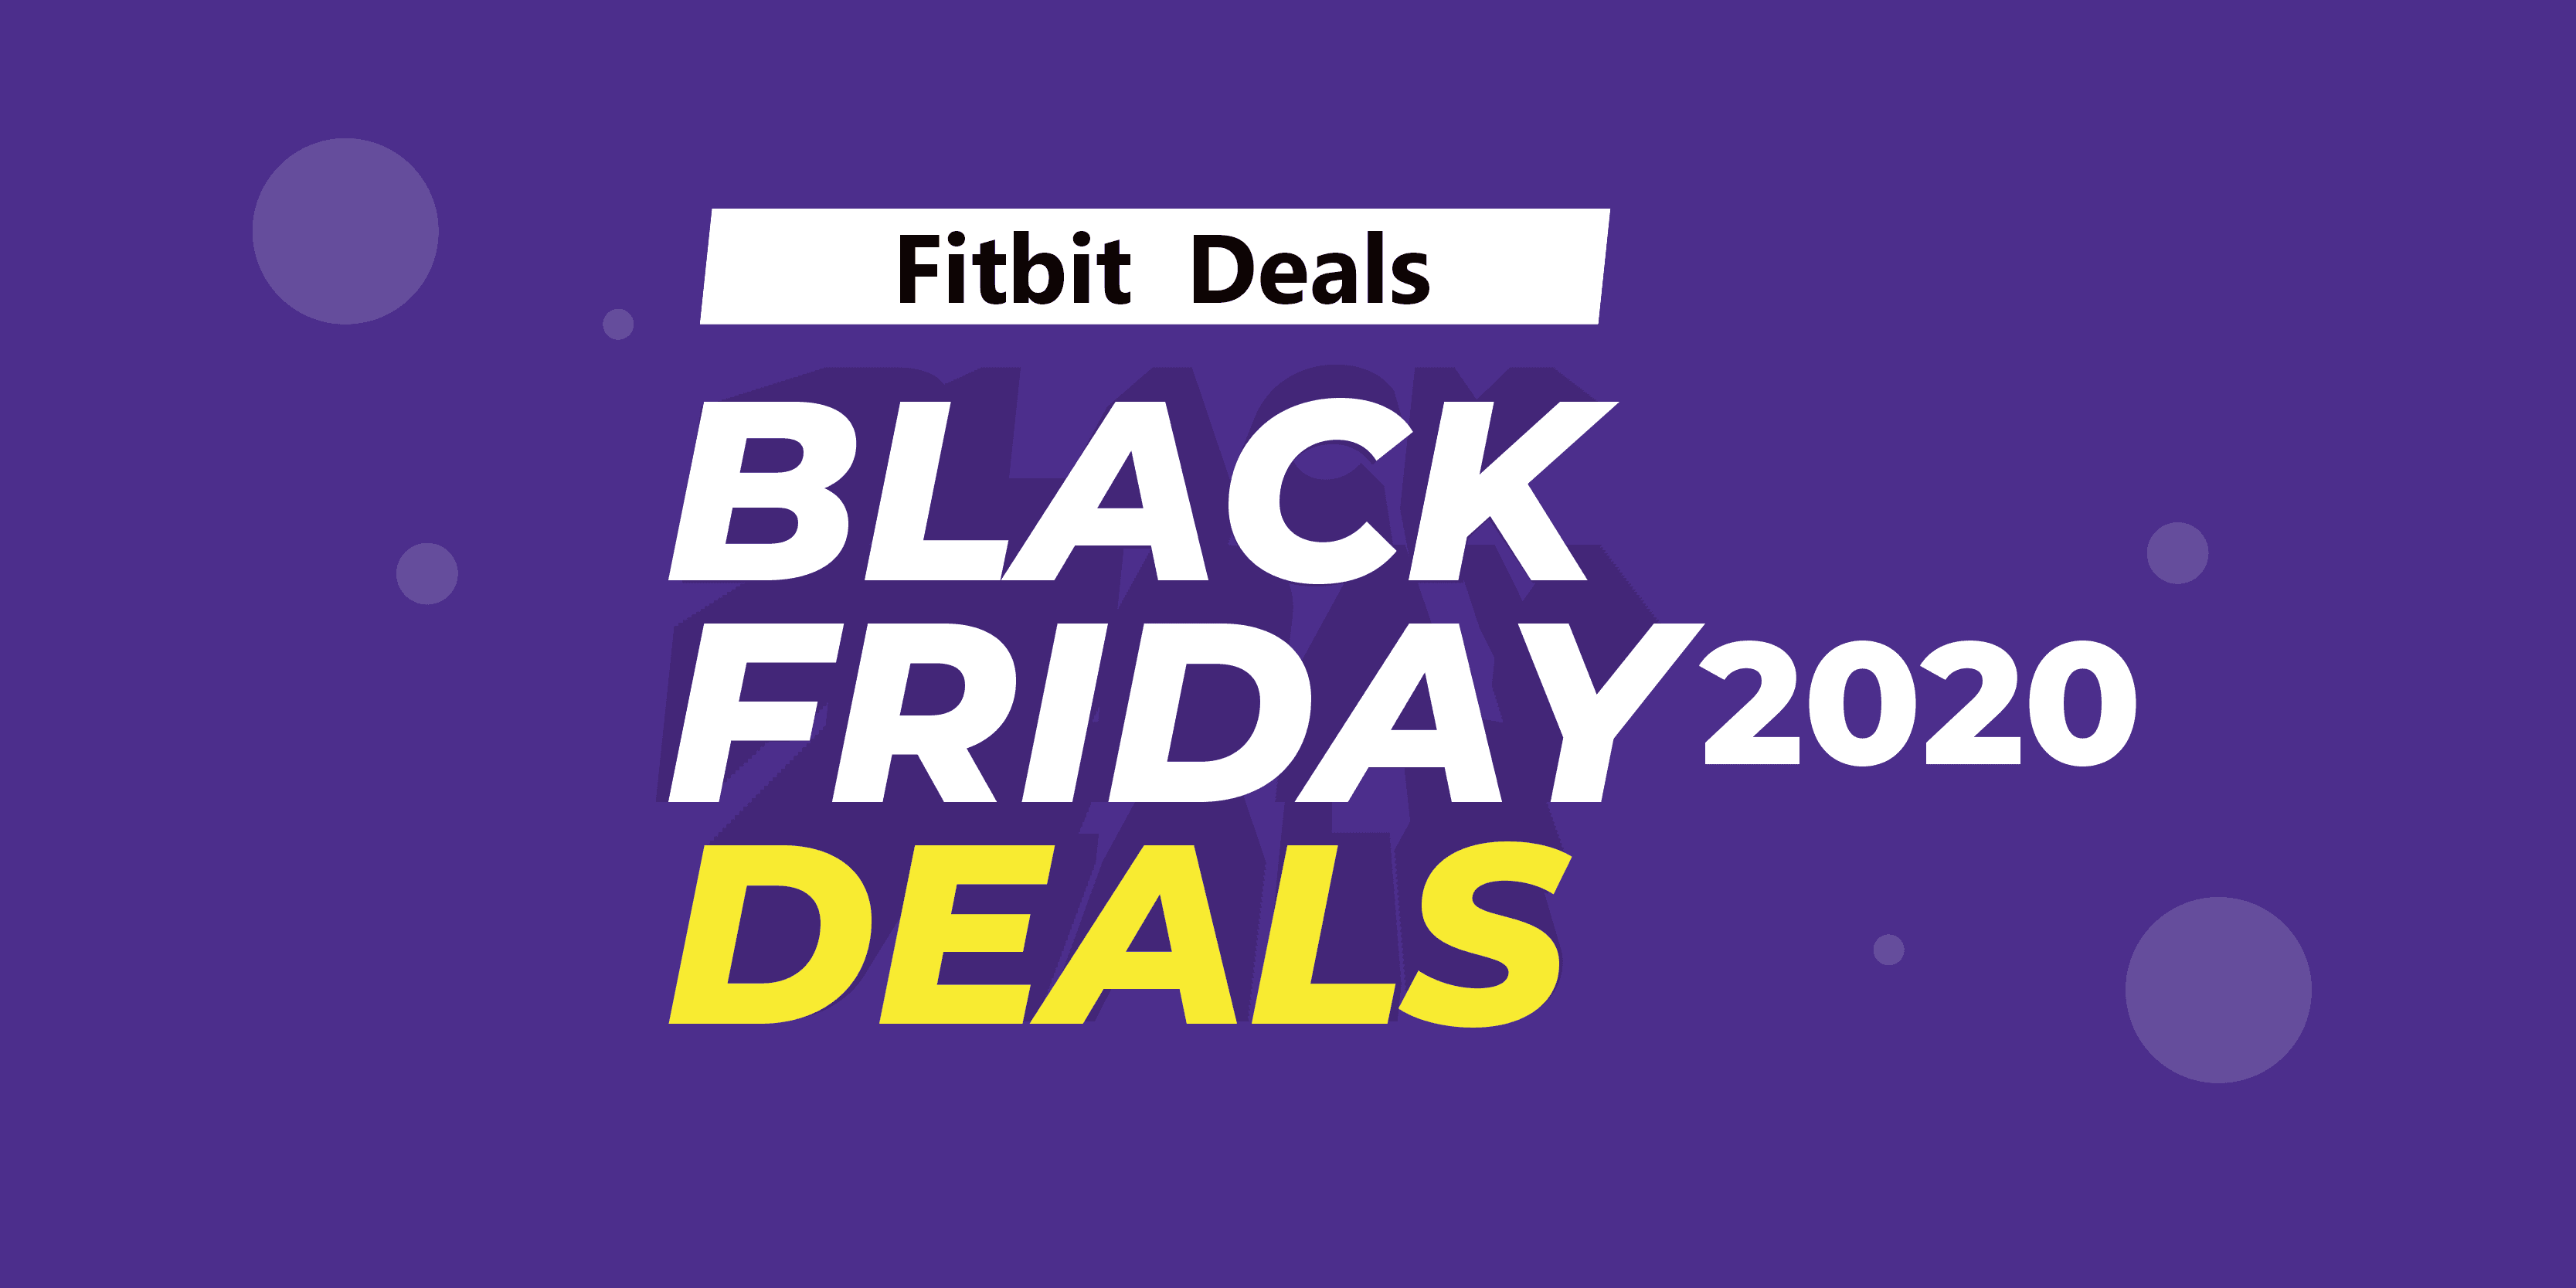 Fitbit Black Friday (2020) Deals On Amazon